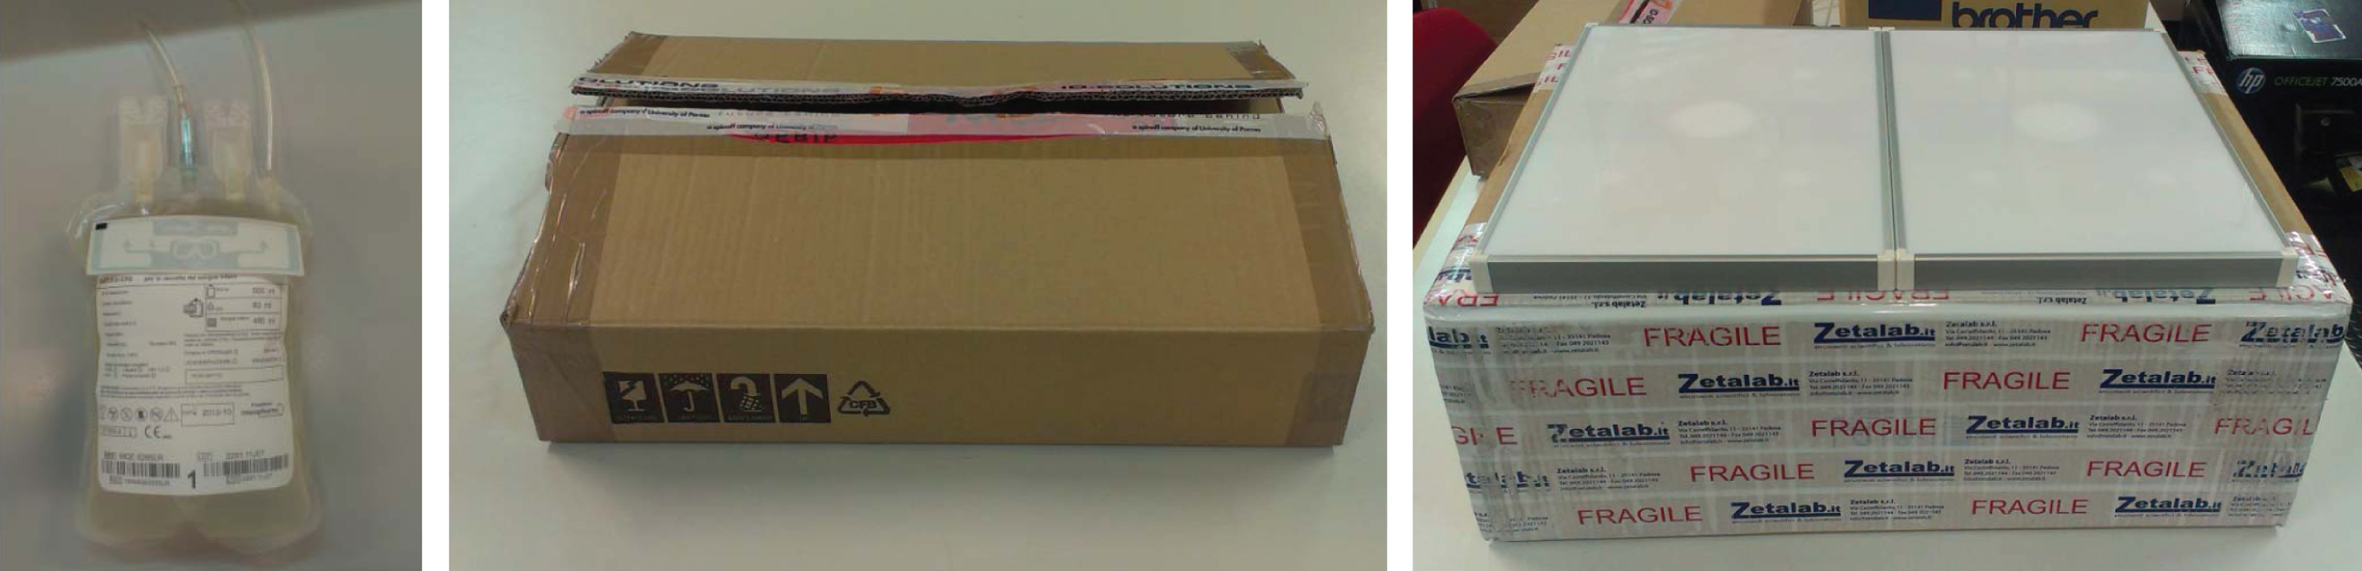 Tagged blood bag (a); cardboard container used for the tests (b); near field antennas setup (c).